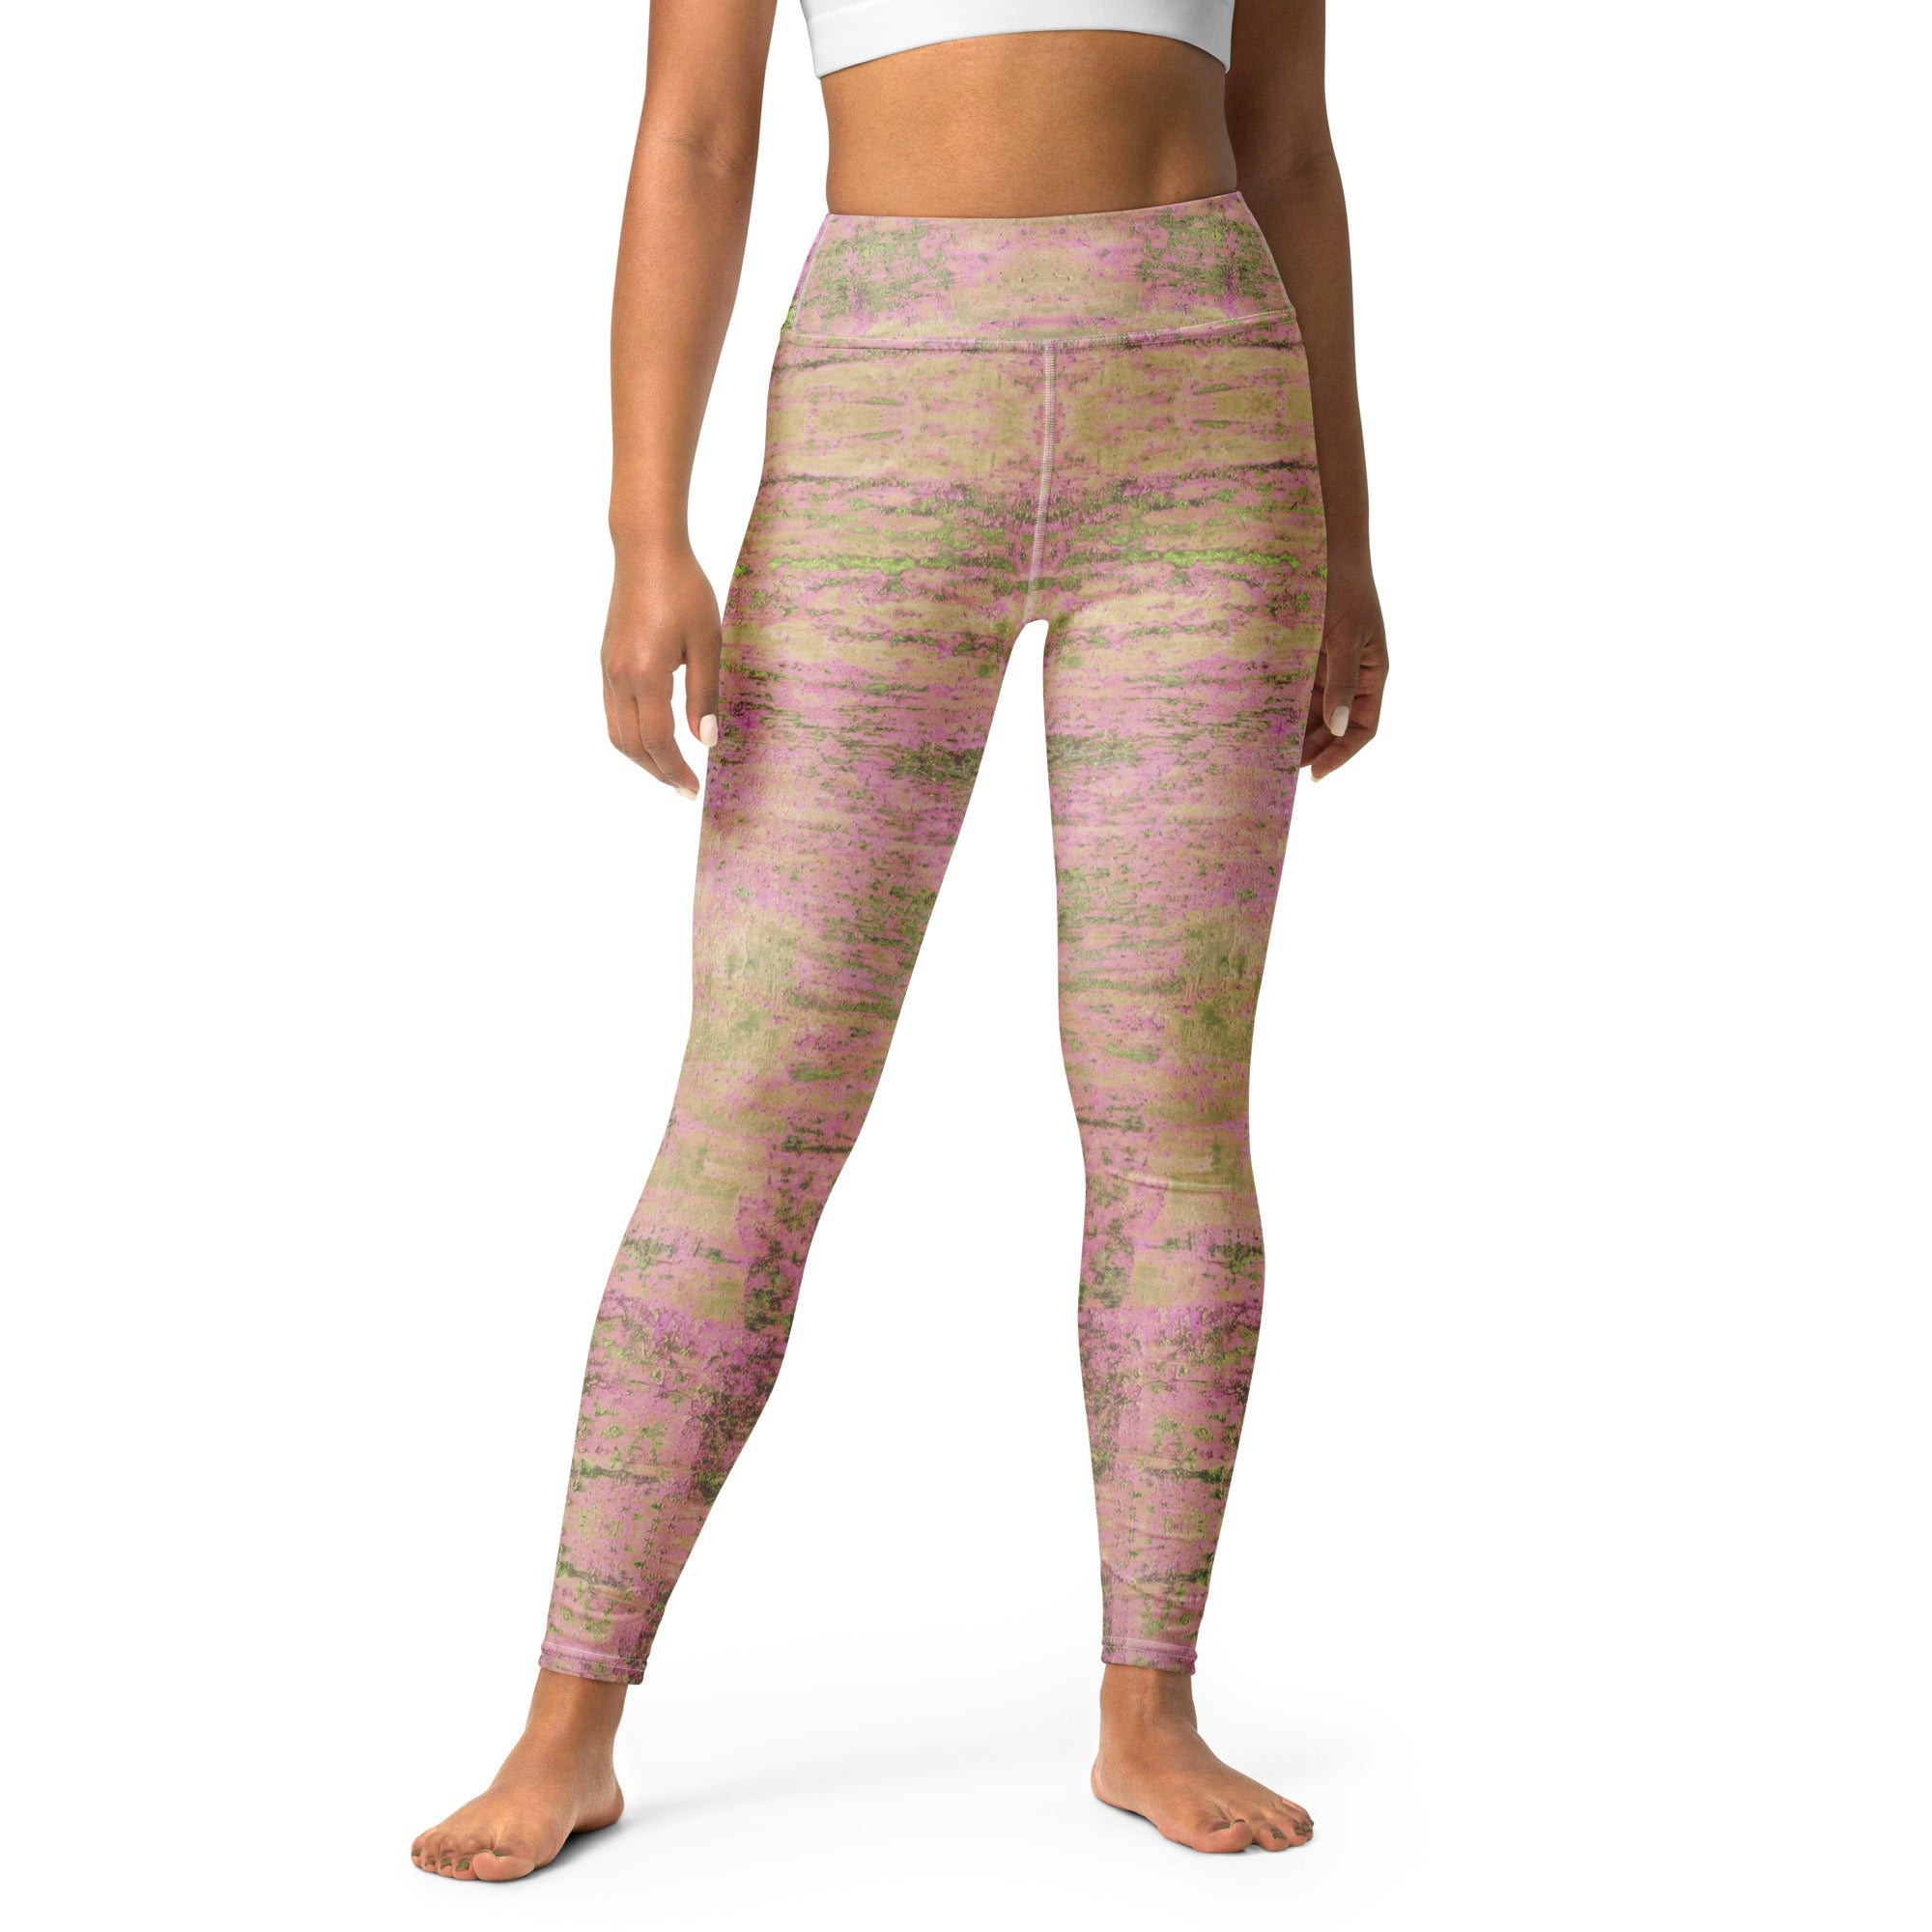 Durable and Stylish Cloud Serenity Leggings for Active Wear